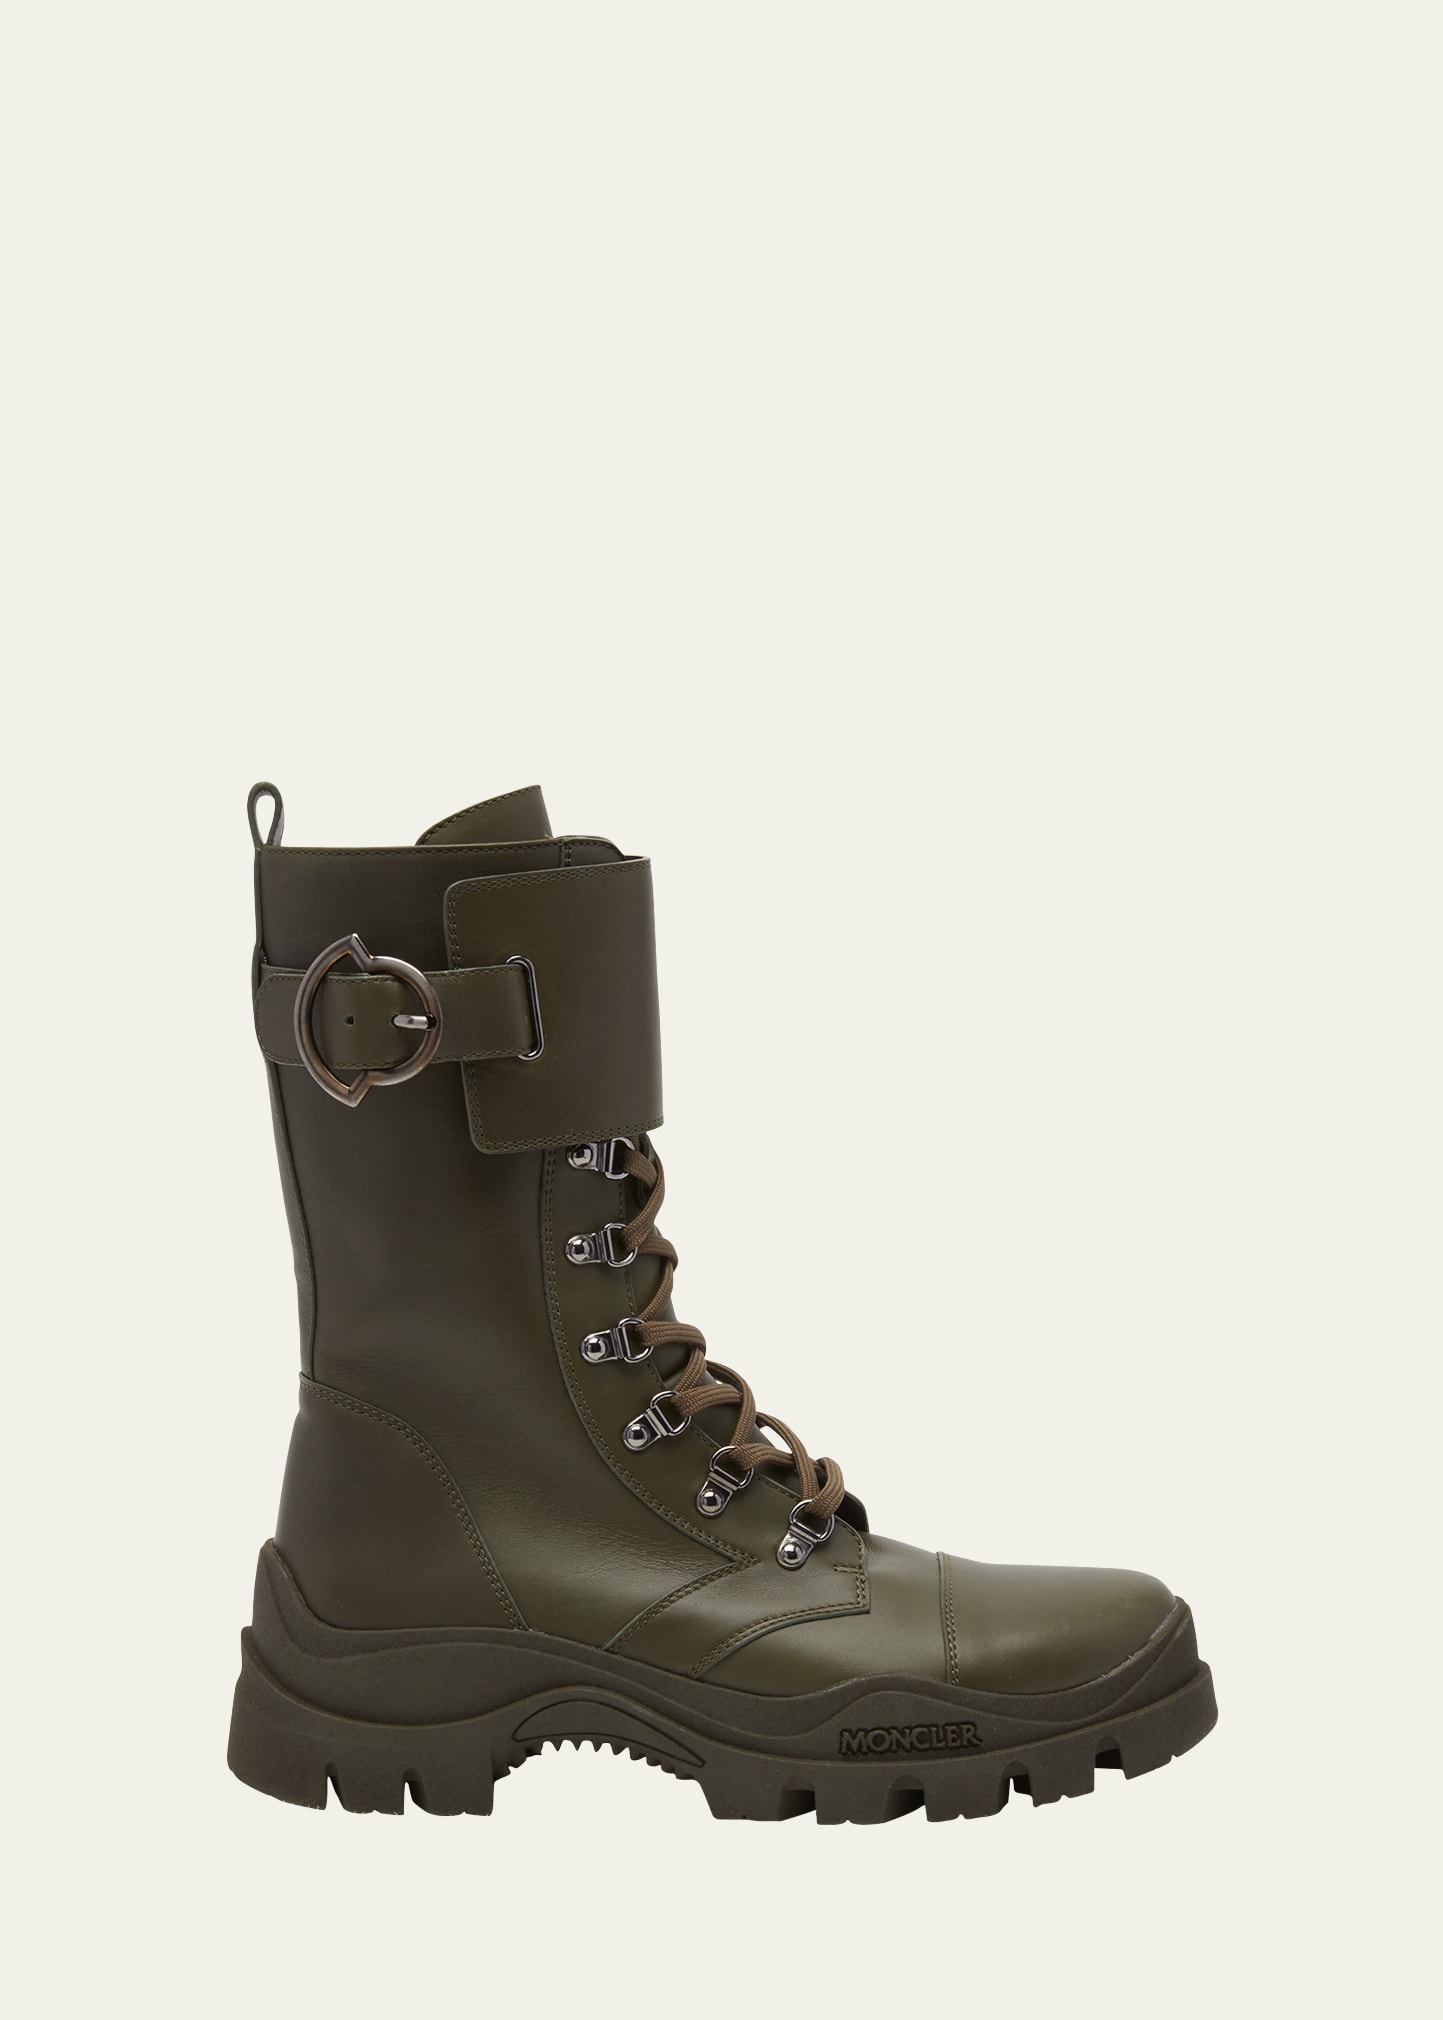 Moncler Emblem Buckle Leather Lace-up Boots In Medium Green